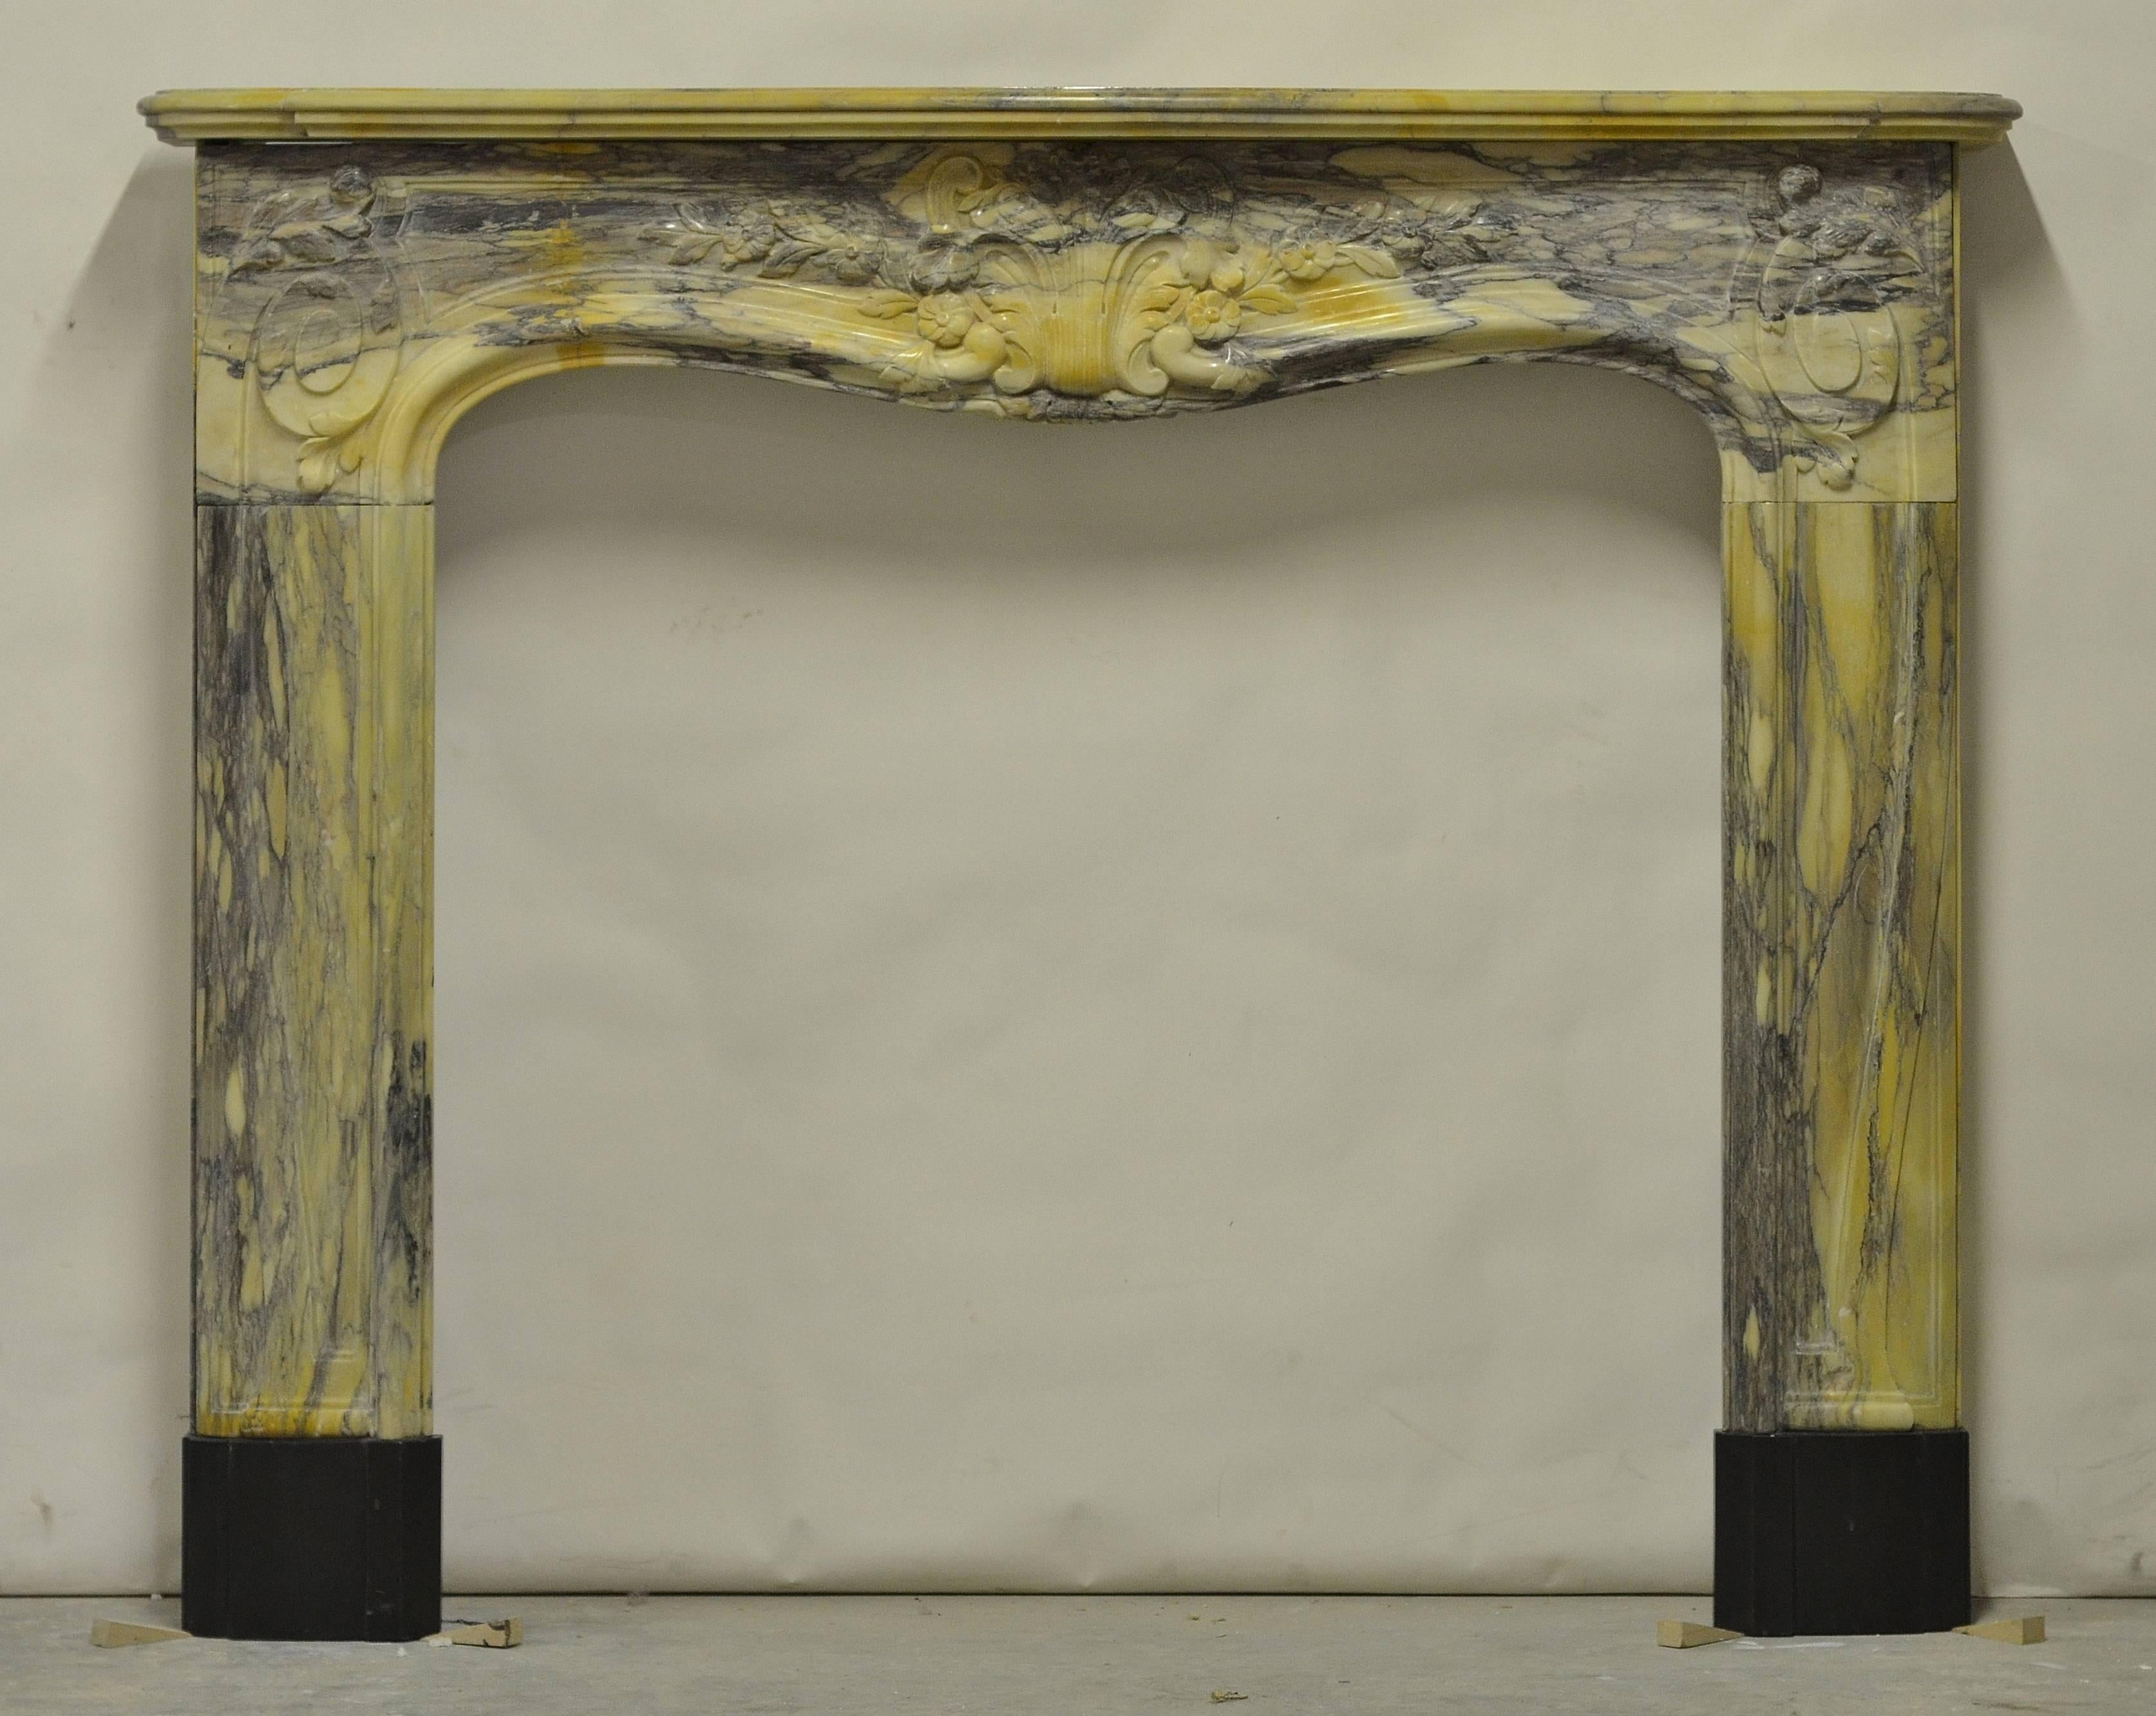 A very colorful and decorative Louis XV Fireplace.
The bright and warm marble really makes this mantel stand out.

Great condition but restored.
Contact us with any questions or requests, we are happy to help!